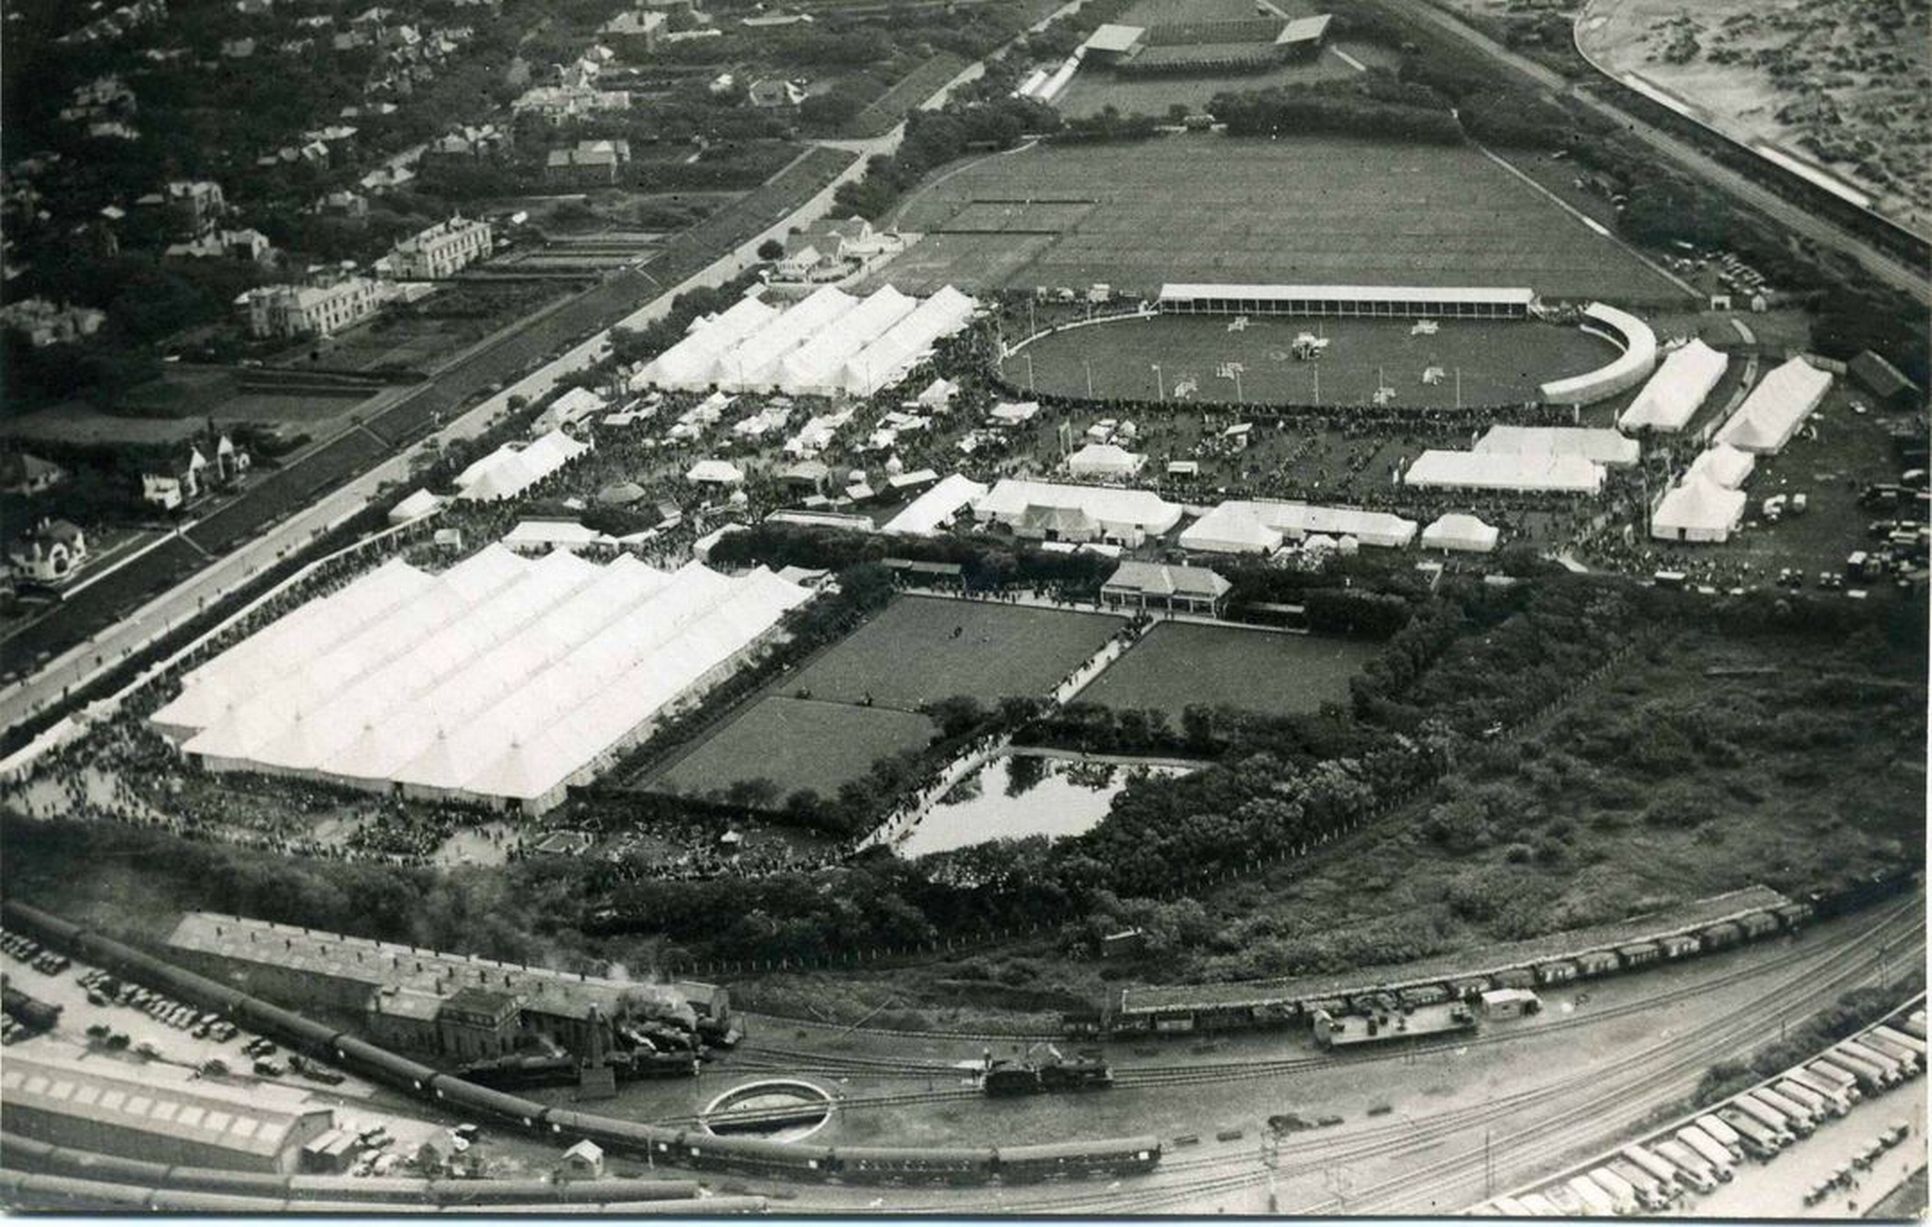 Undated aerial photo of Southport Flower Show in Victoria Park in Southport, showing the equestrian show ground, the floral marquees, and the railway line running past. Photo by George Latham